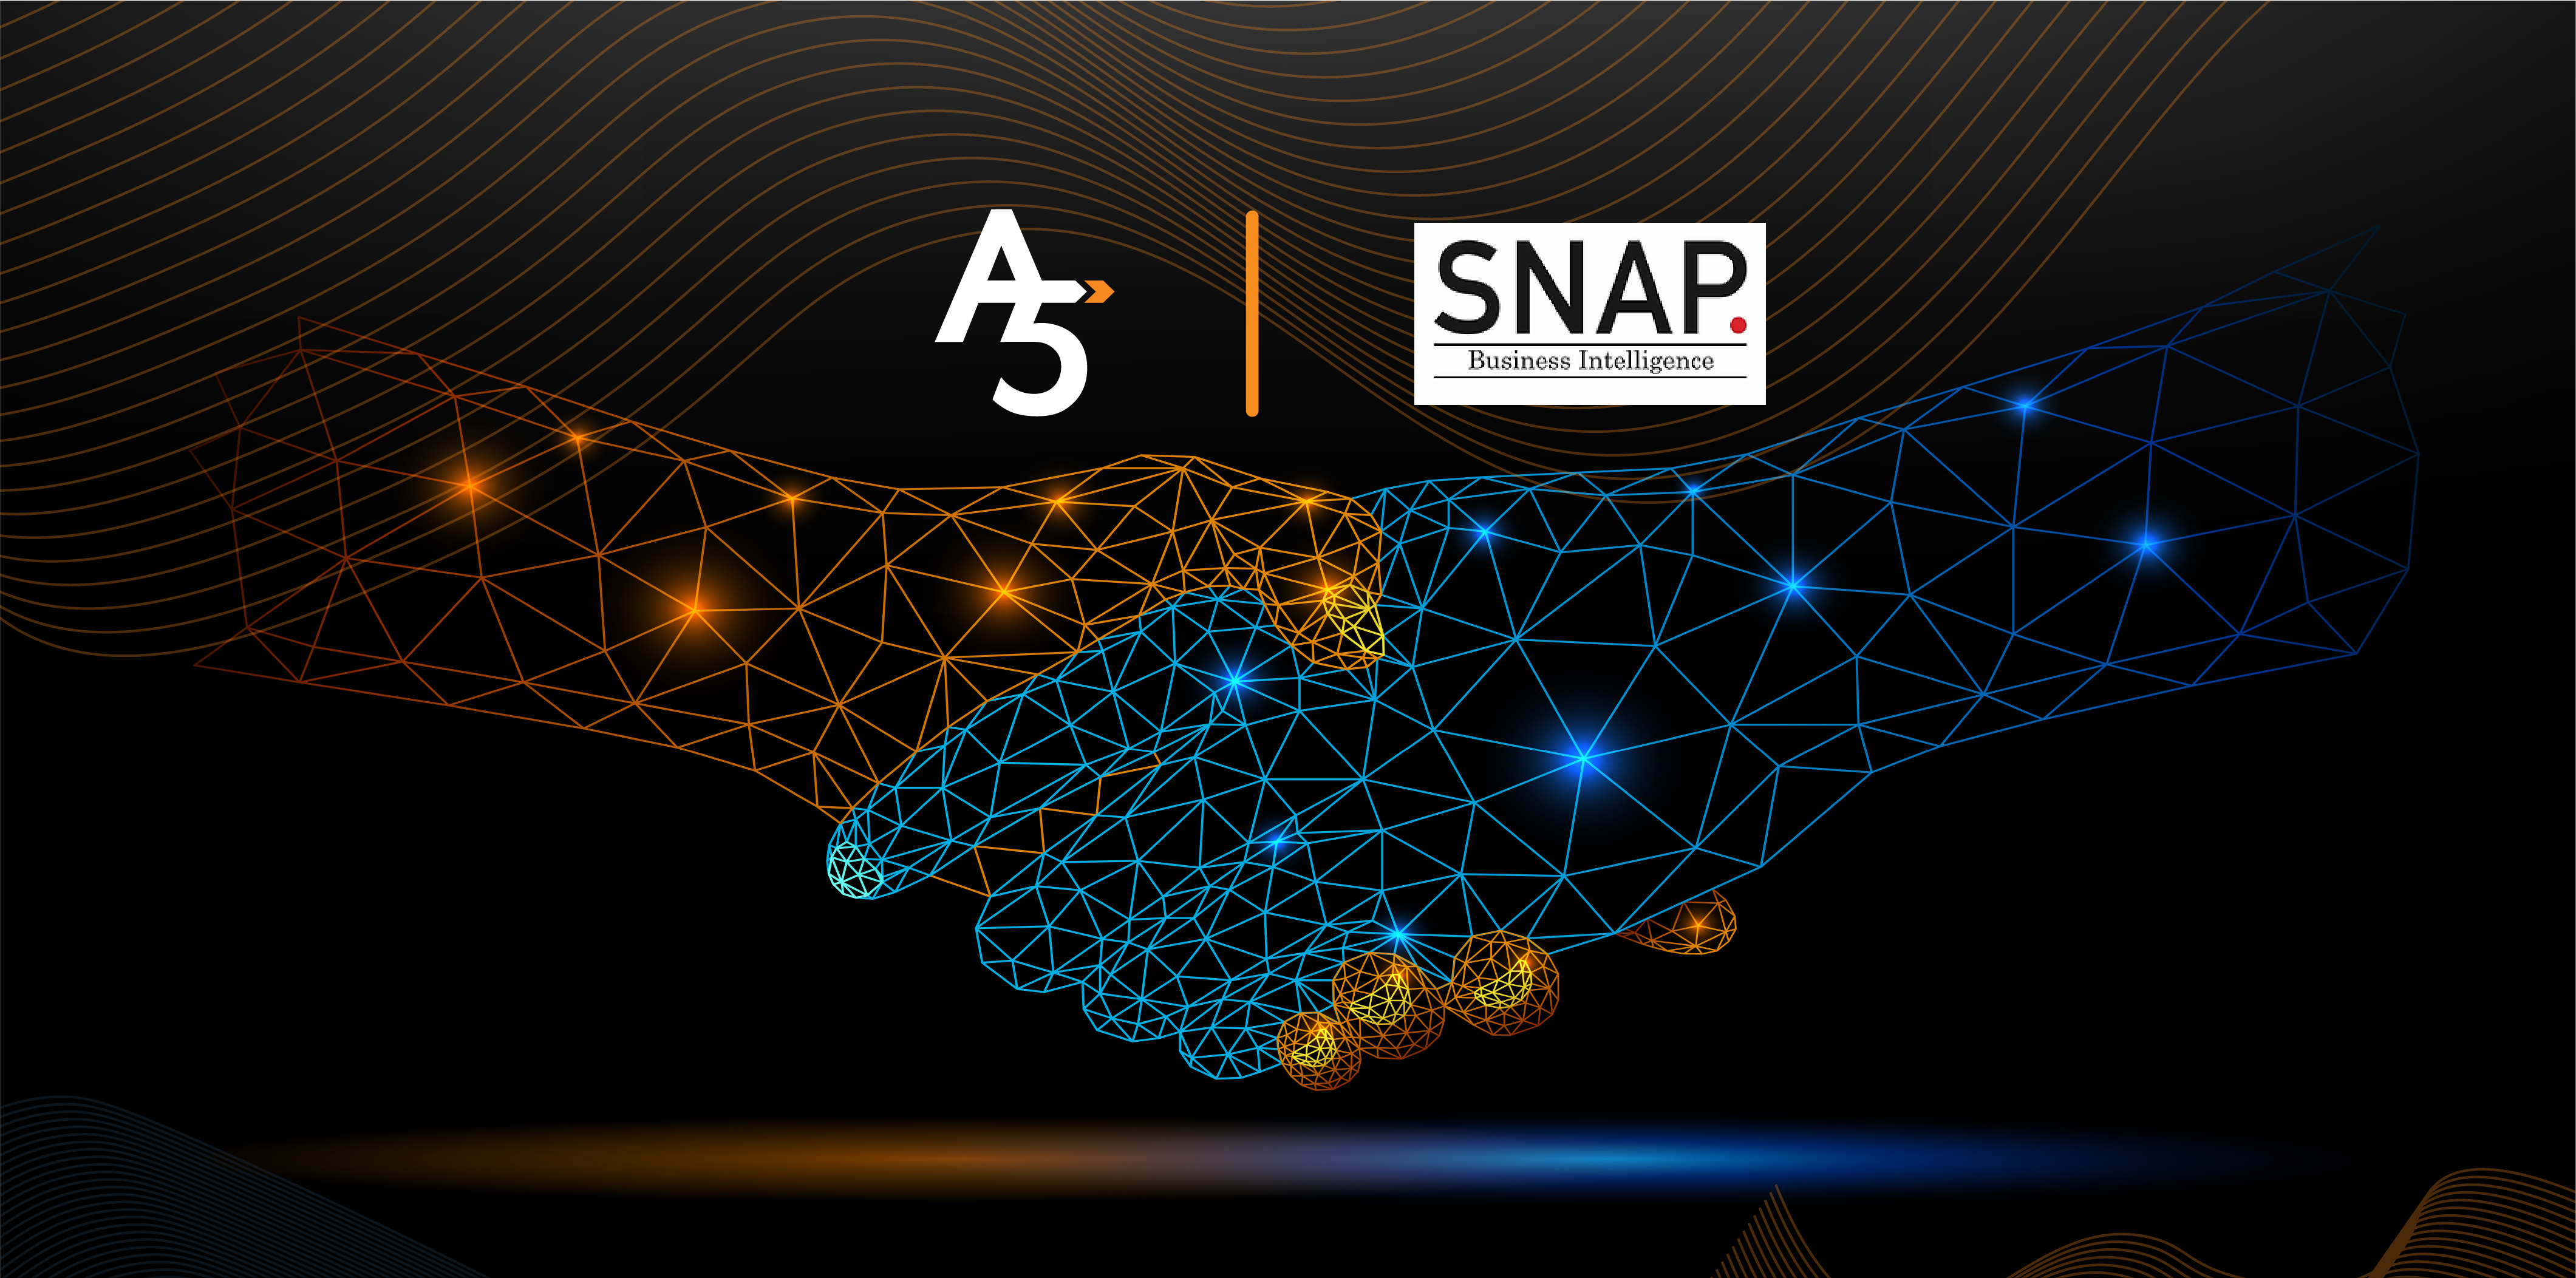 A5 Completes Its Third Acquisition With SnapBI